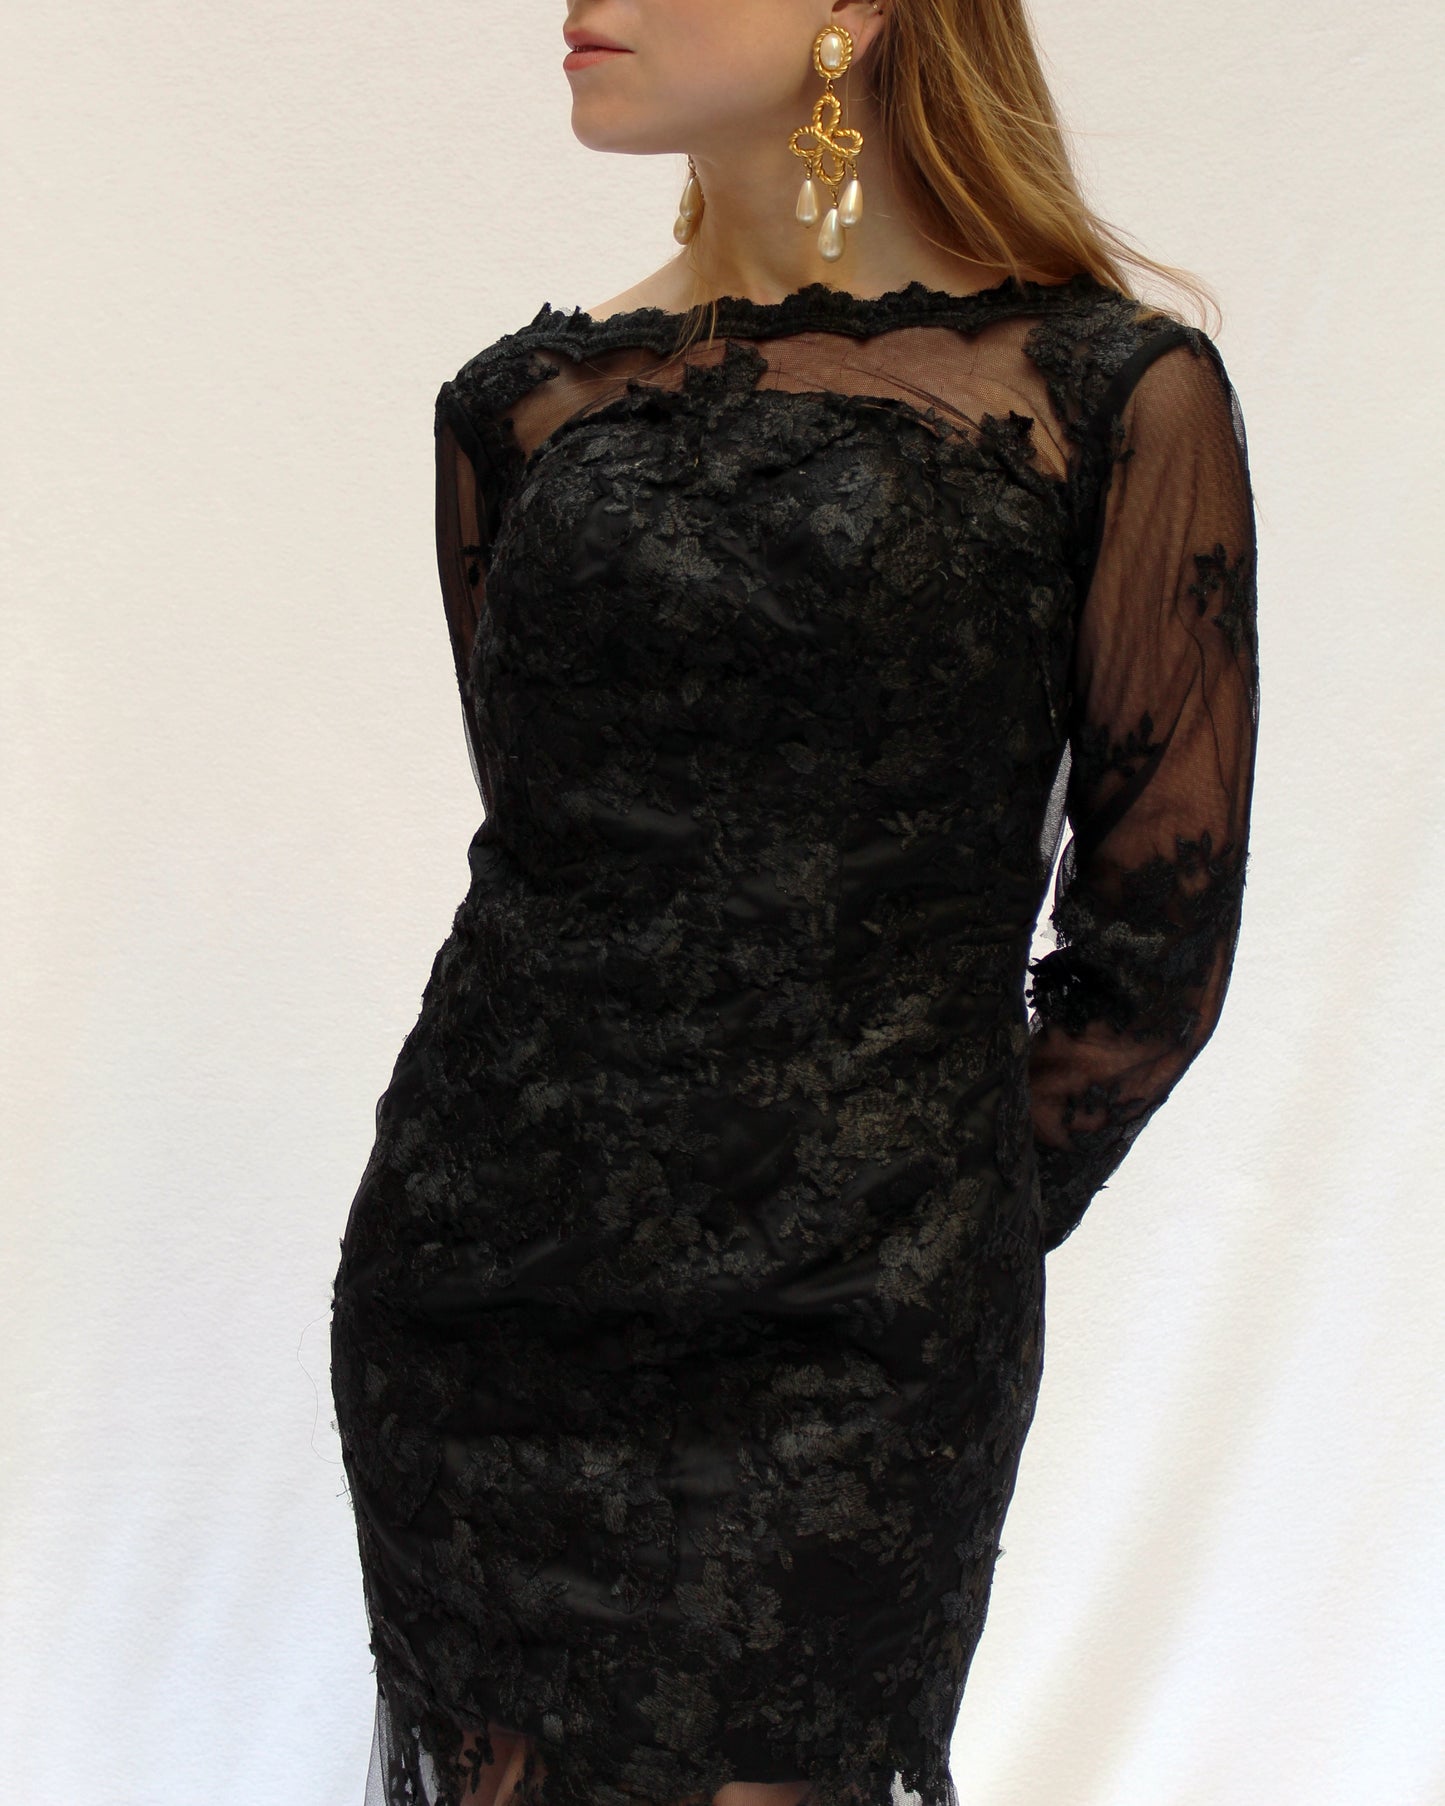 VINTAGE BLACK LACE GOWN, IN THE STYLE OF DOLCE & GABBANA